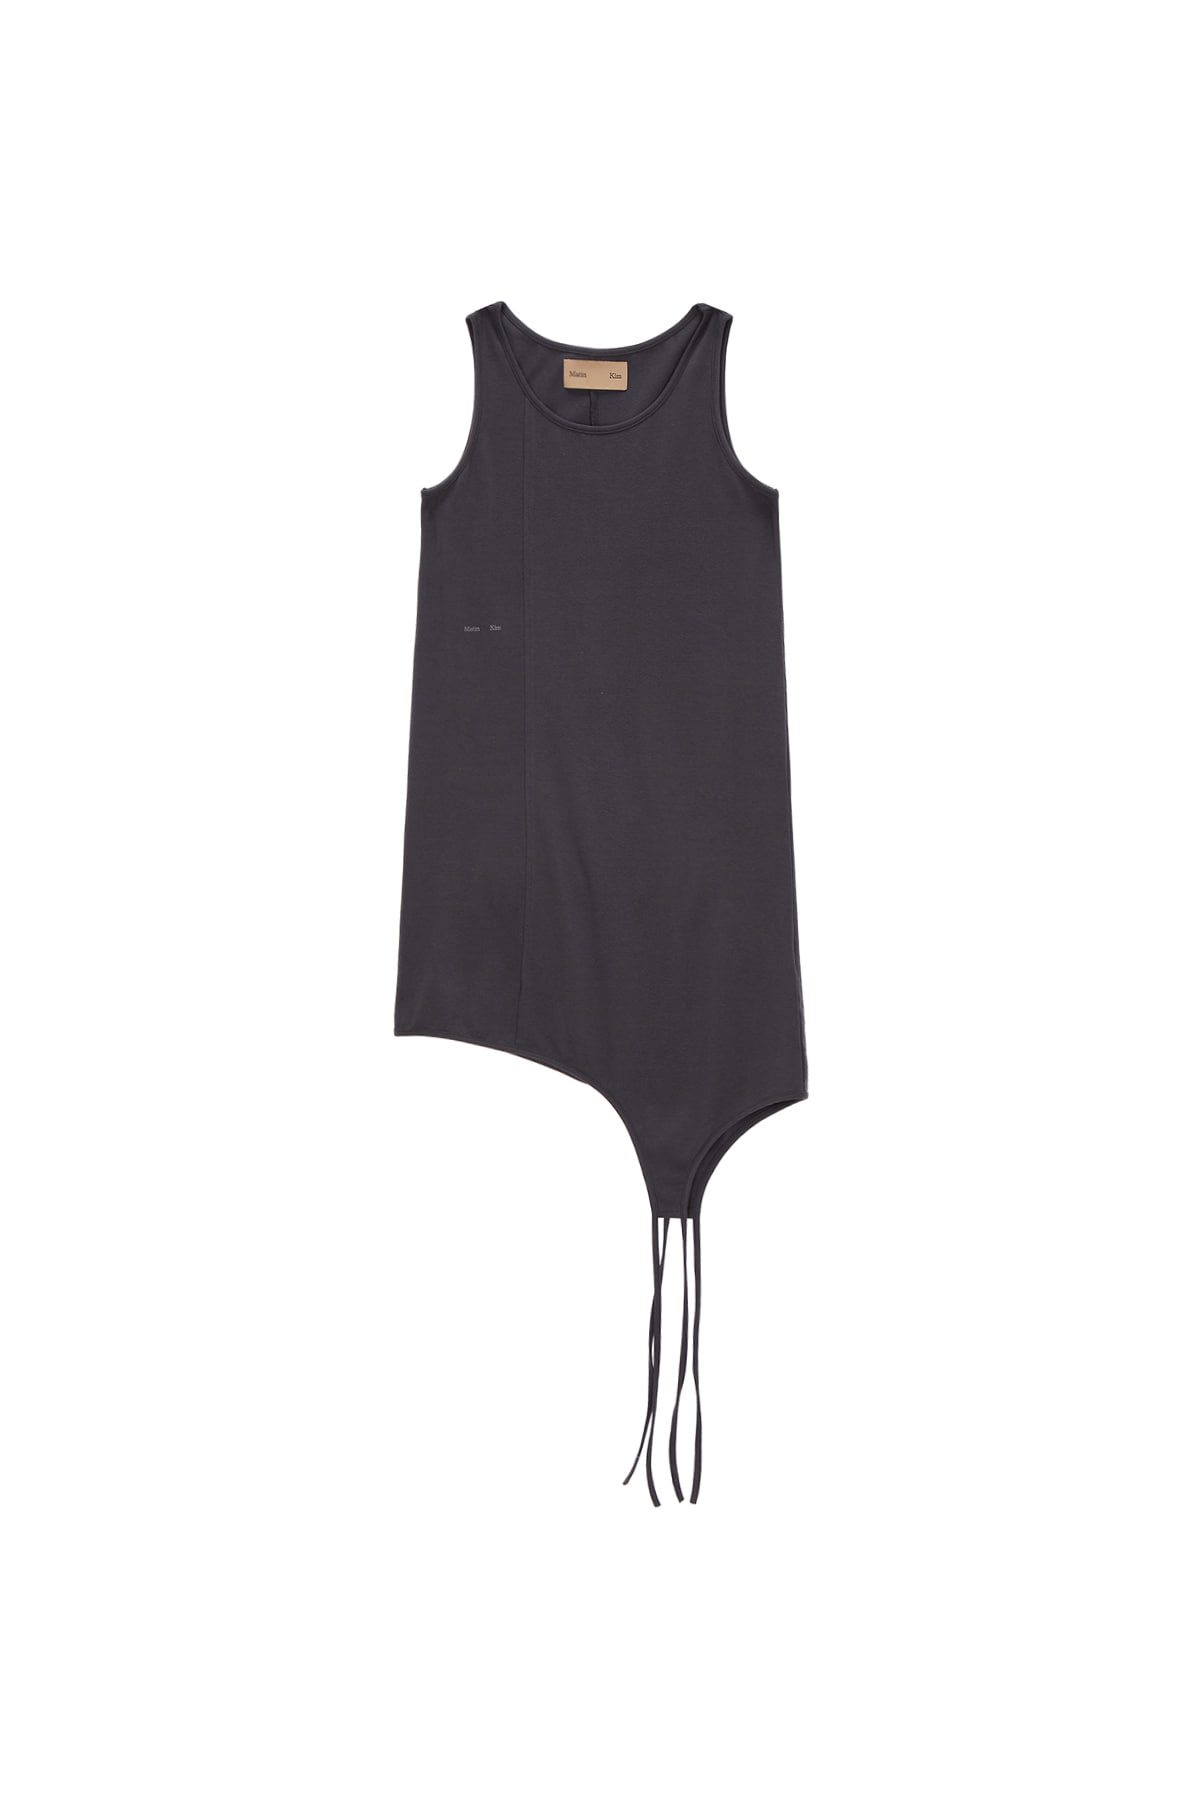 SLEEVELESS TAIL ONE PIECE IN CHARCOAL